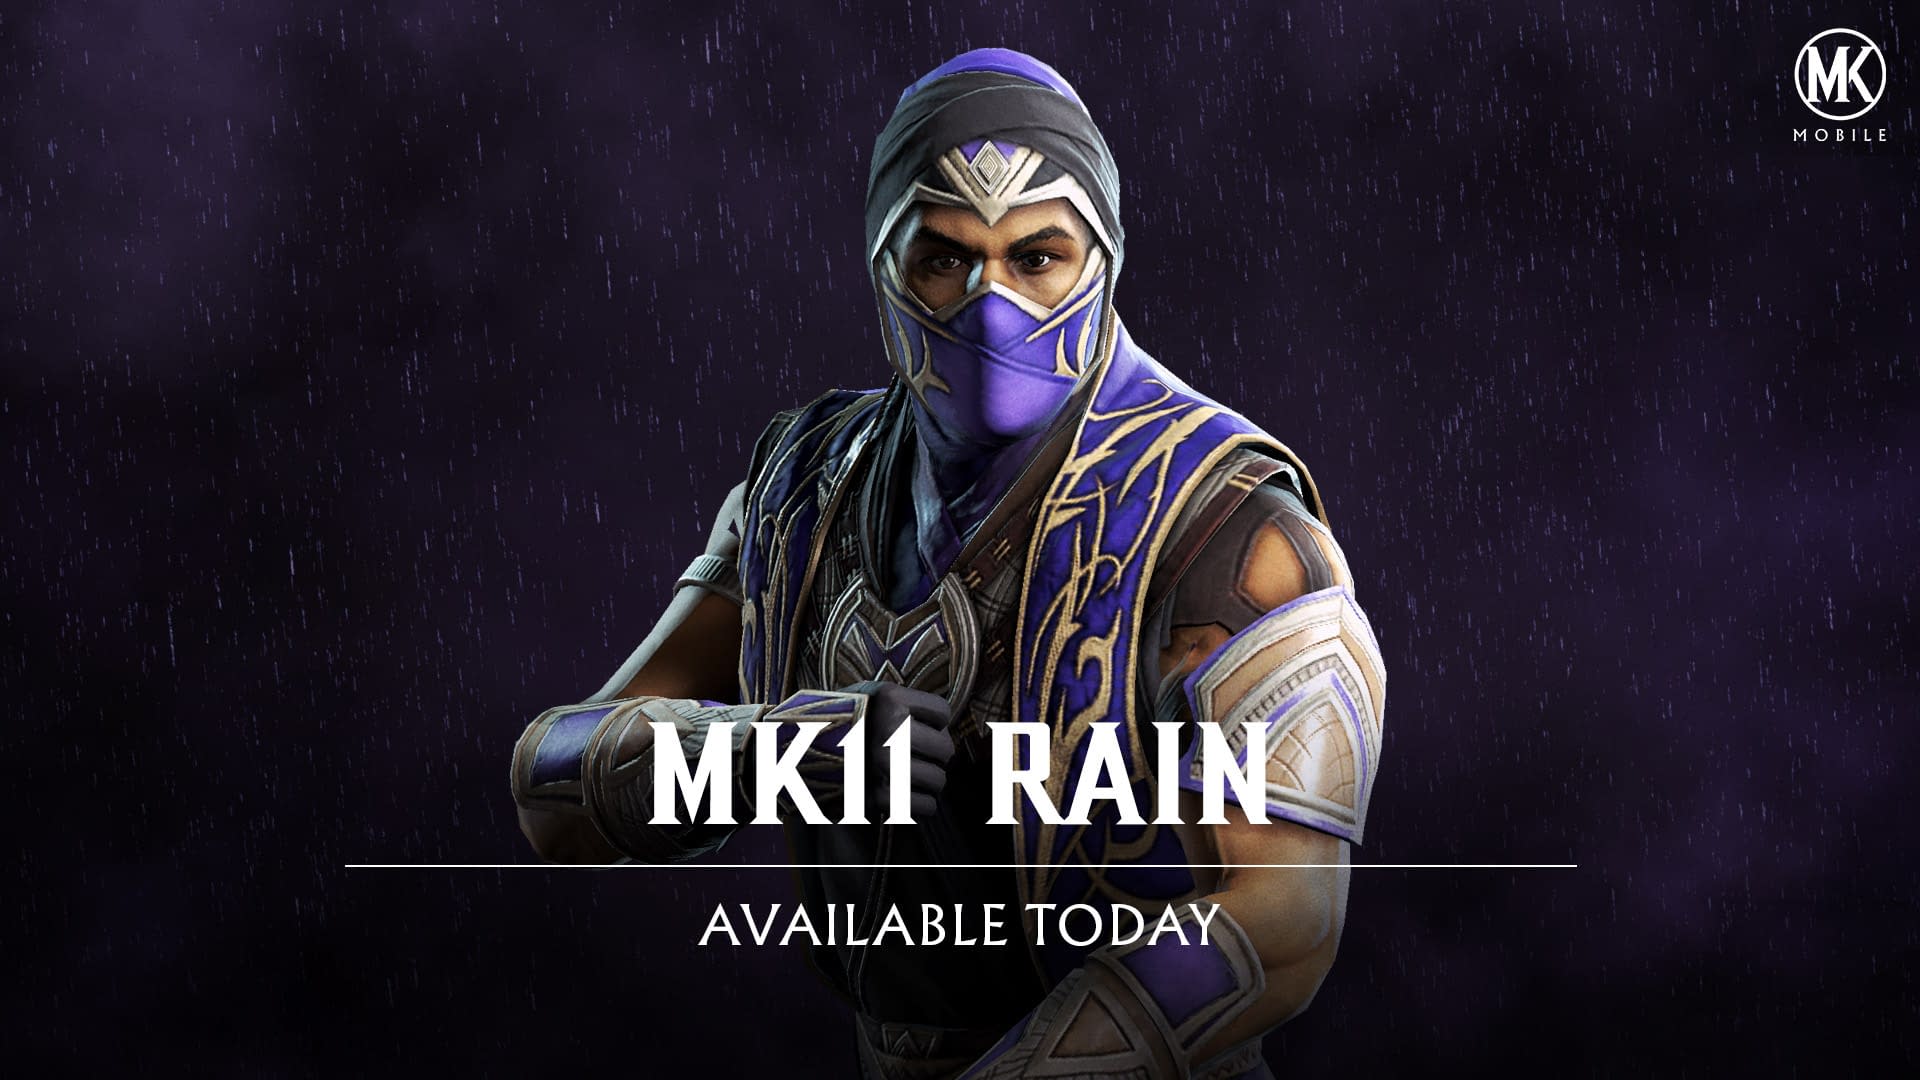 Mortal Kombat Mobile Info - Upcoming events and challenges updates